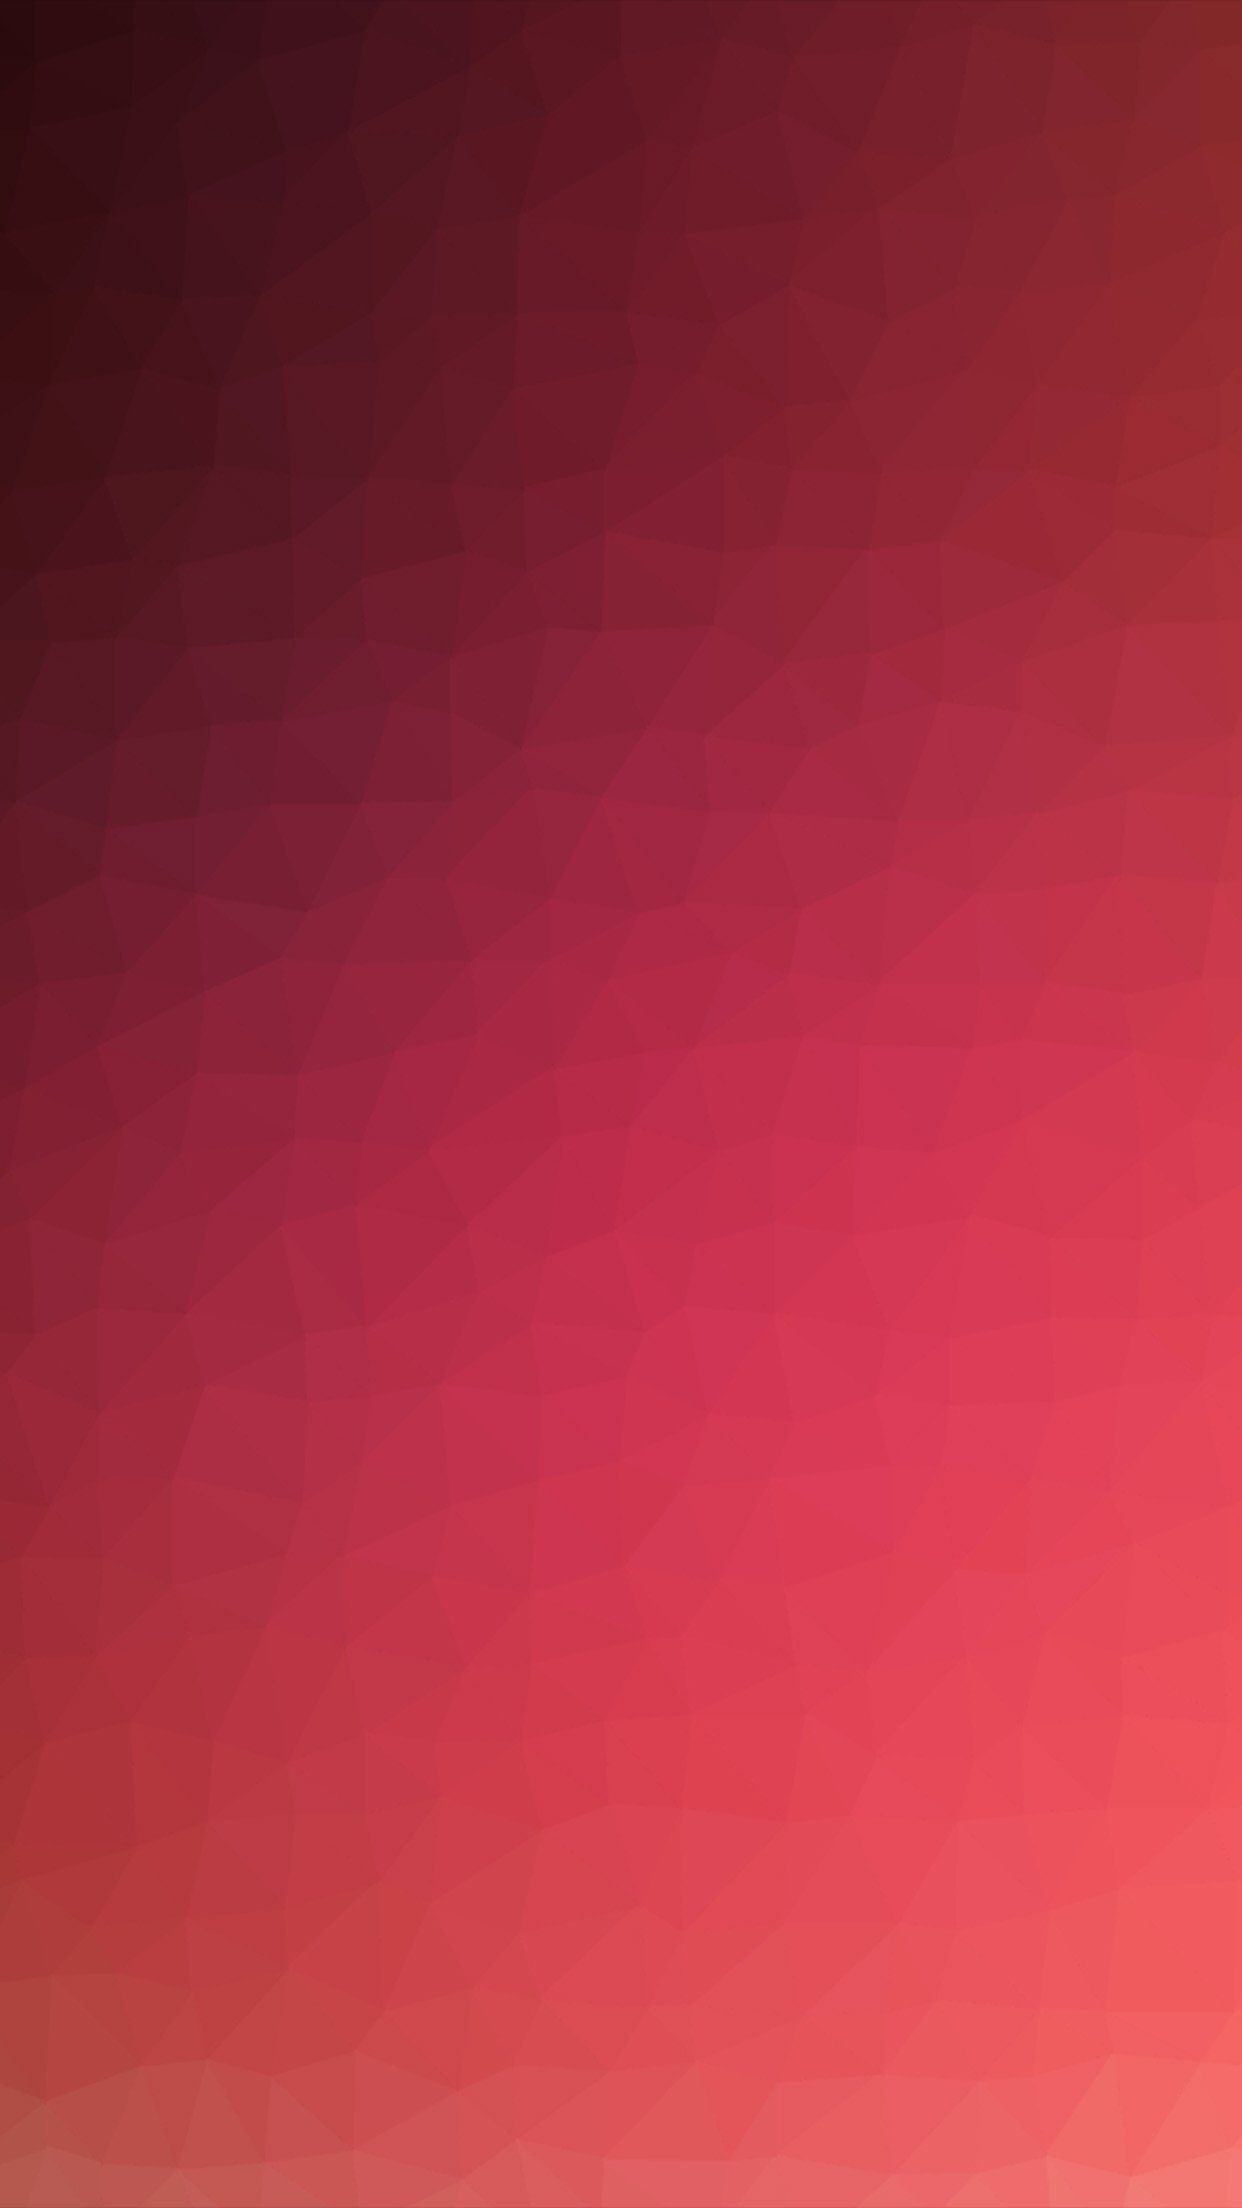 Polygon Art Red Dark Abstract Pattern Android wallpaper